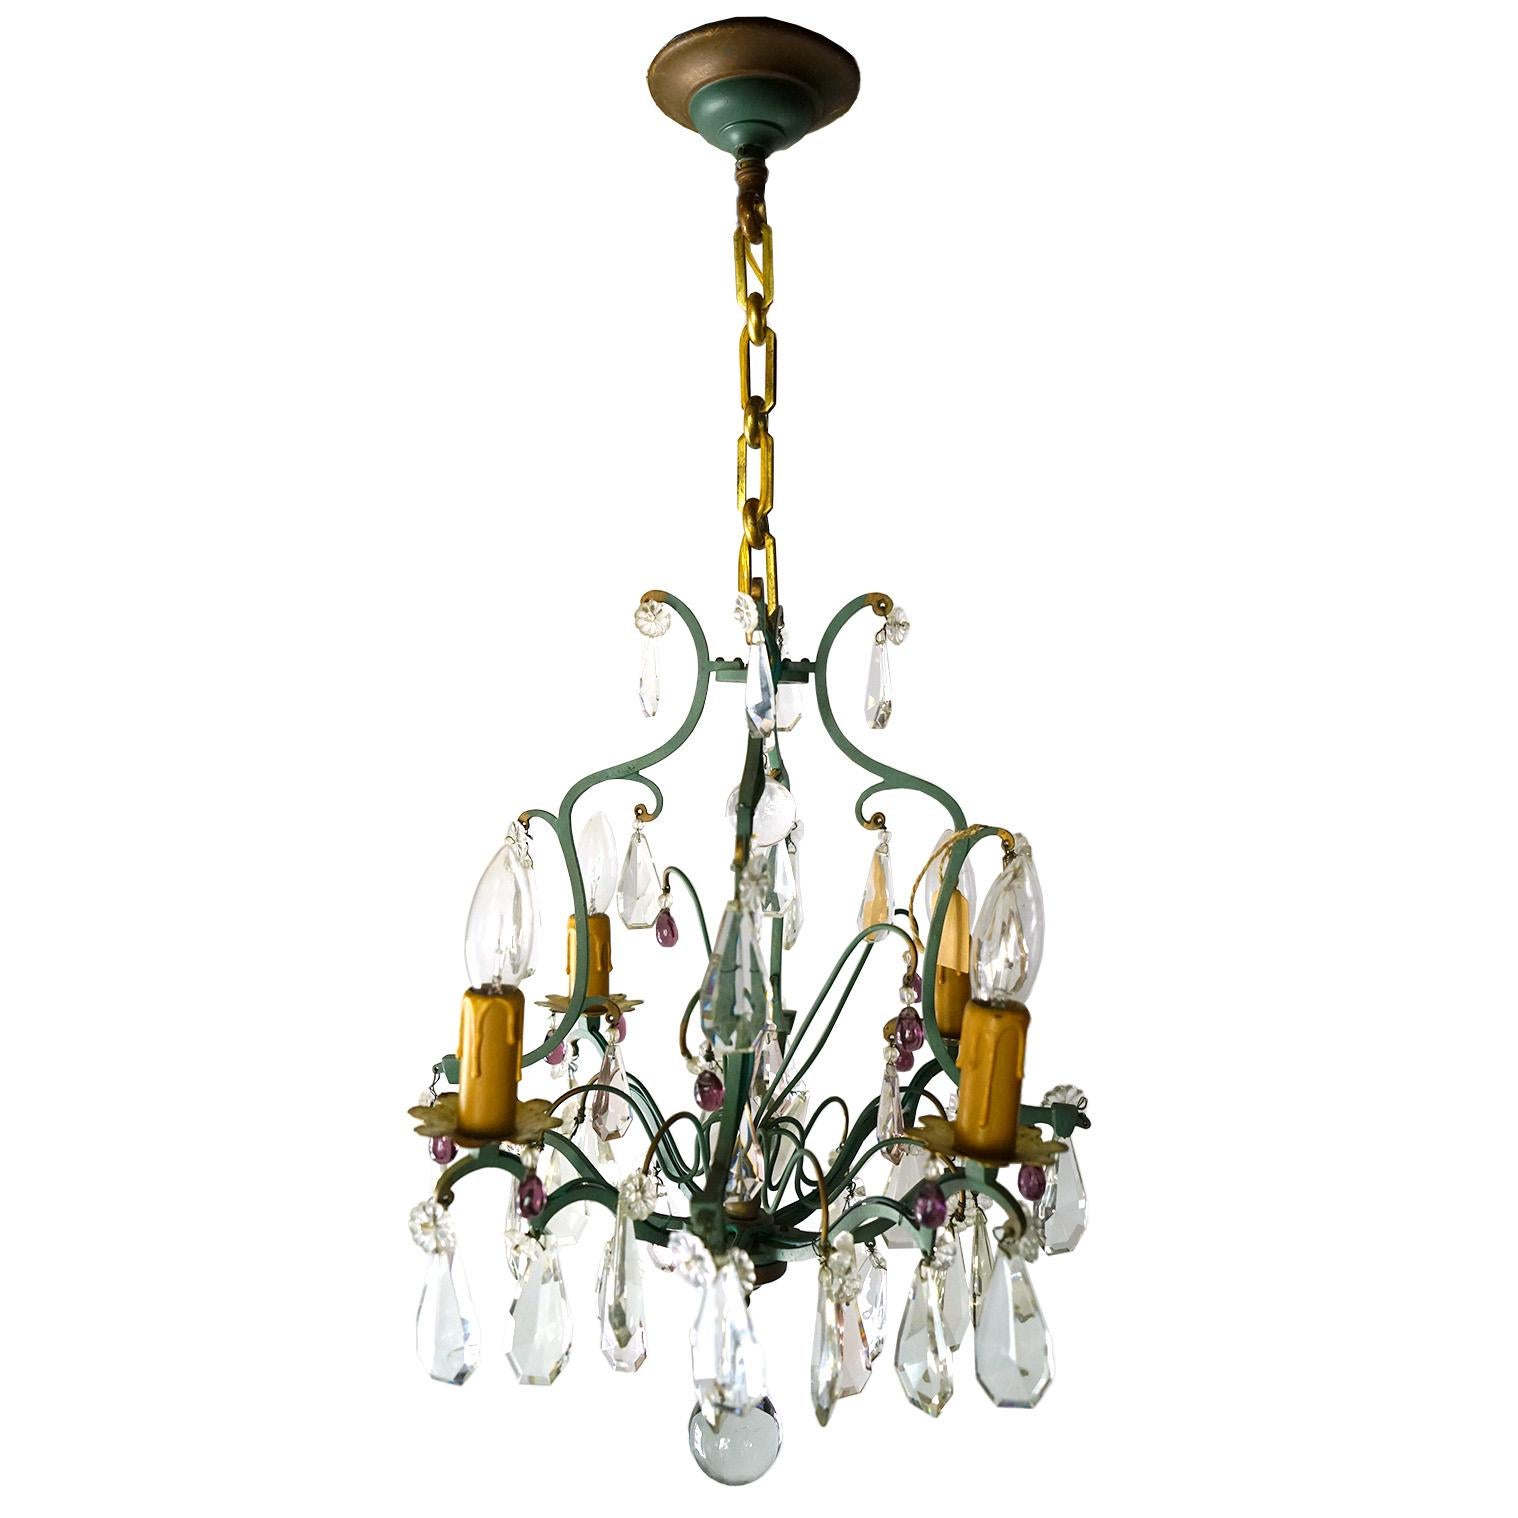 A vintage crystal chandelier with four drip candles. Wired and ready!